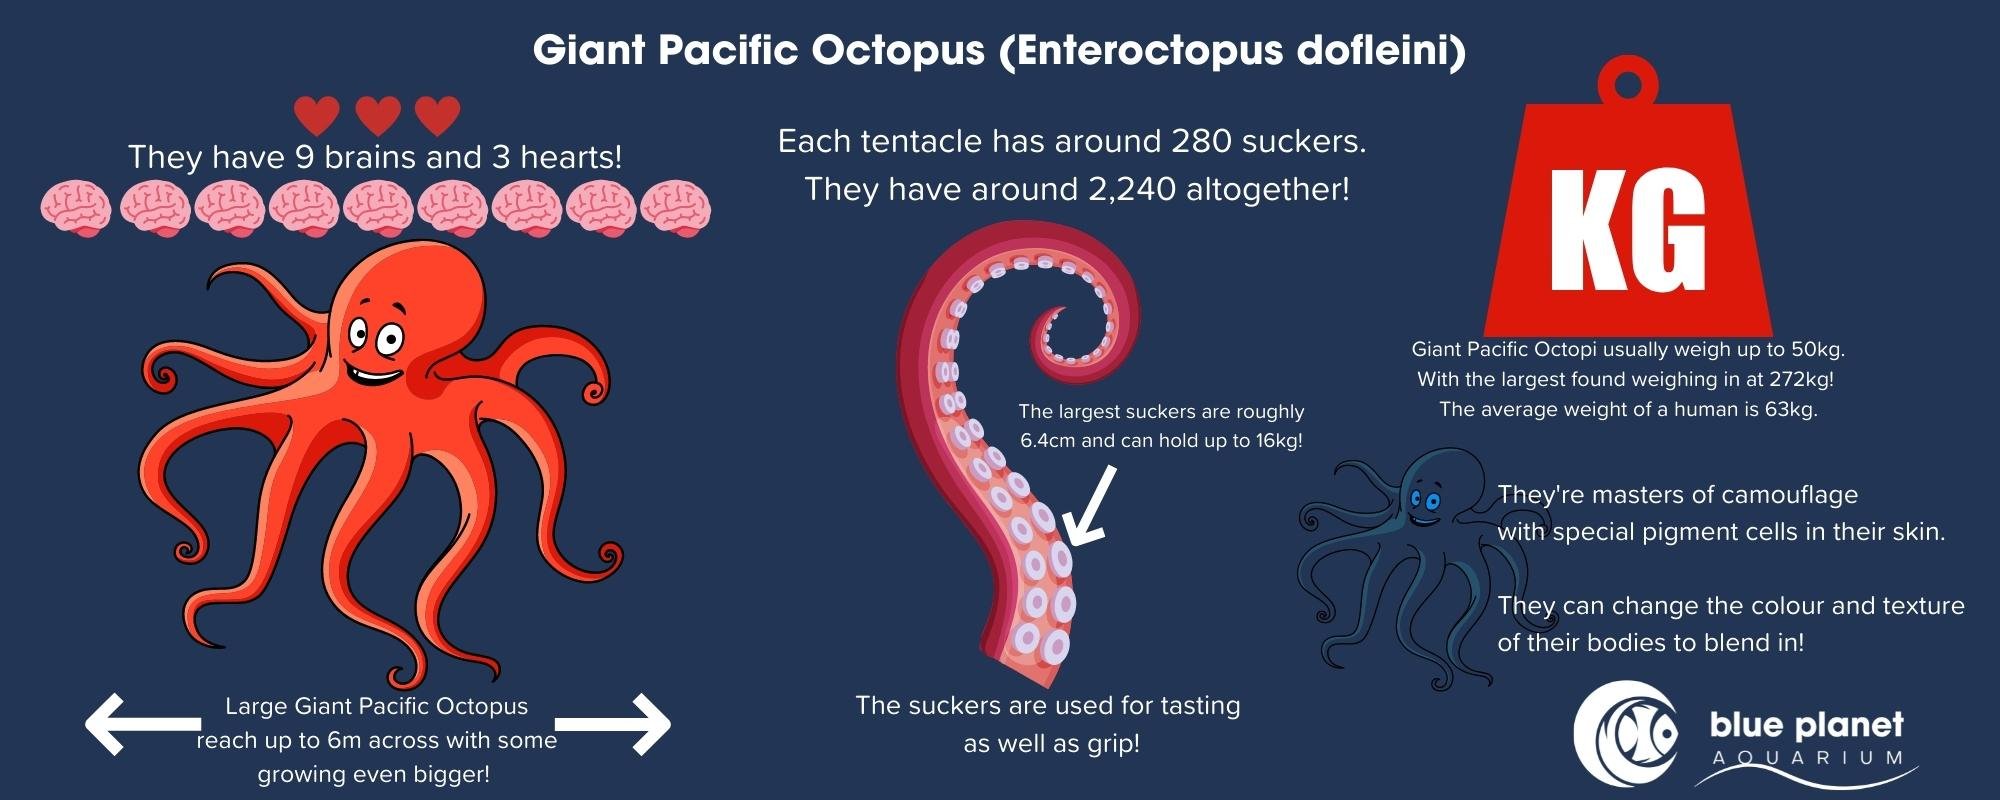 Giant Pacific Octopus fact infographic